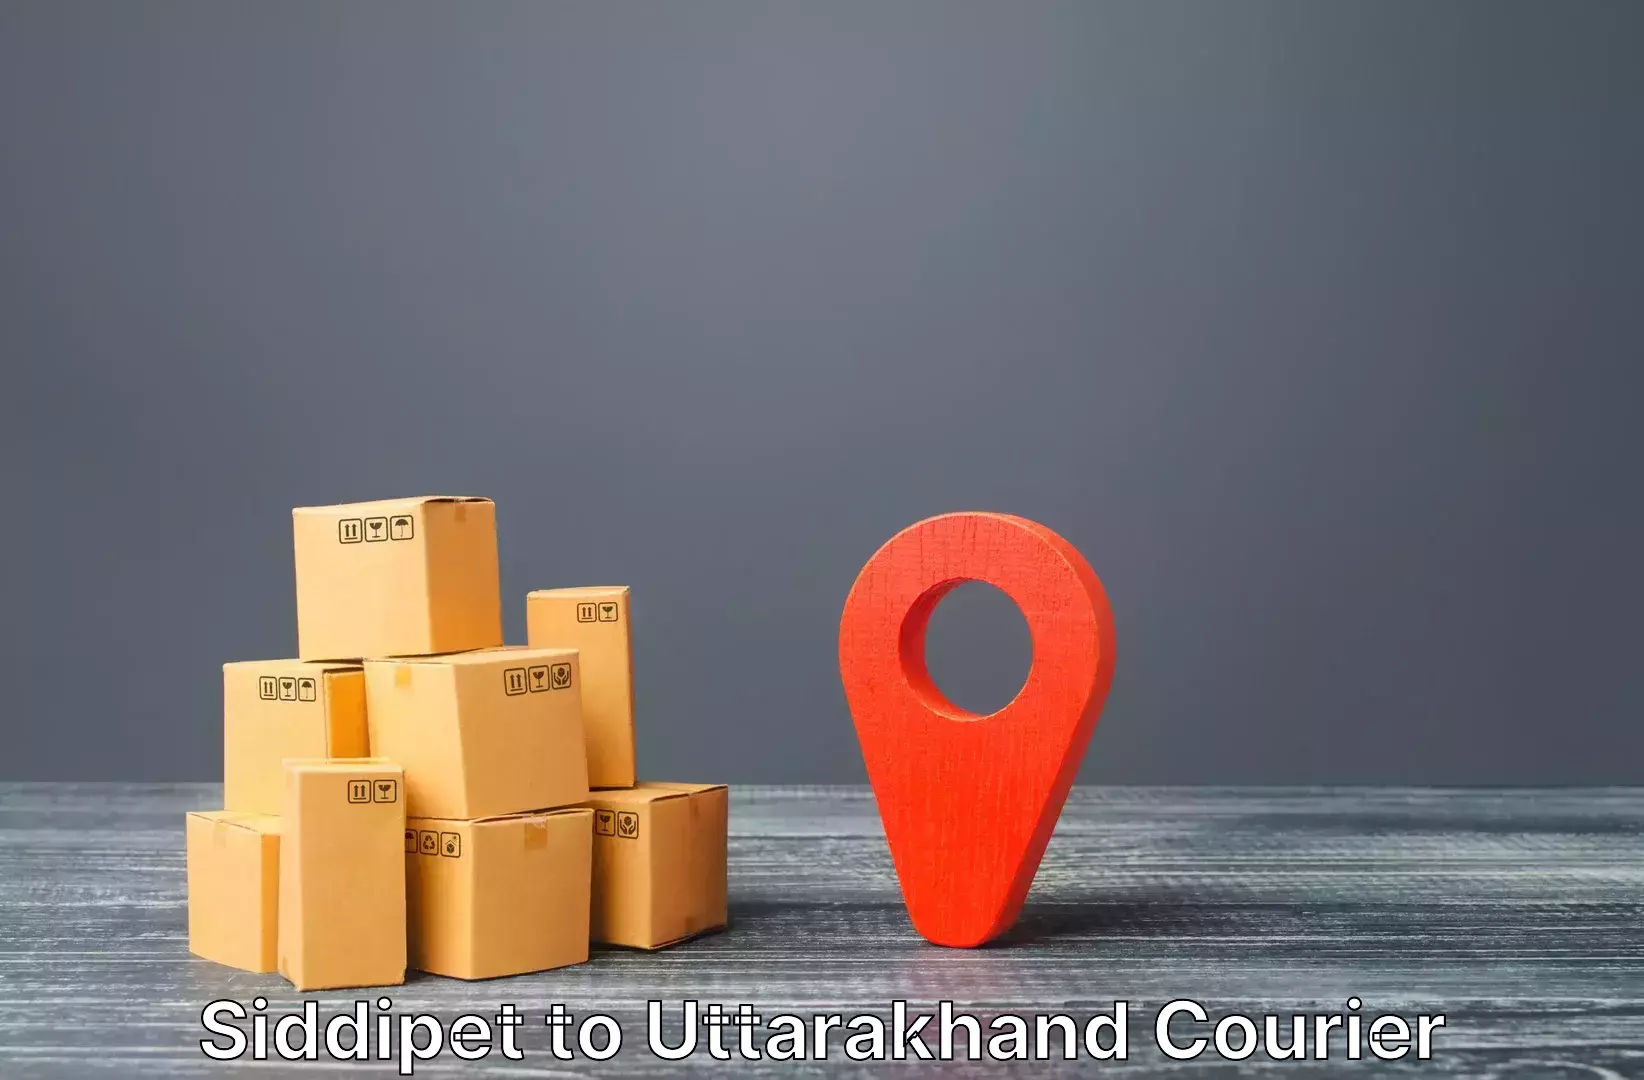 Simplified luggage transport in Siddipet to Uttarakhand